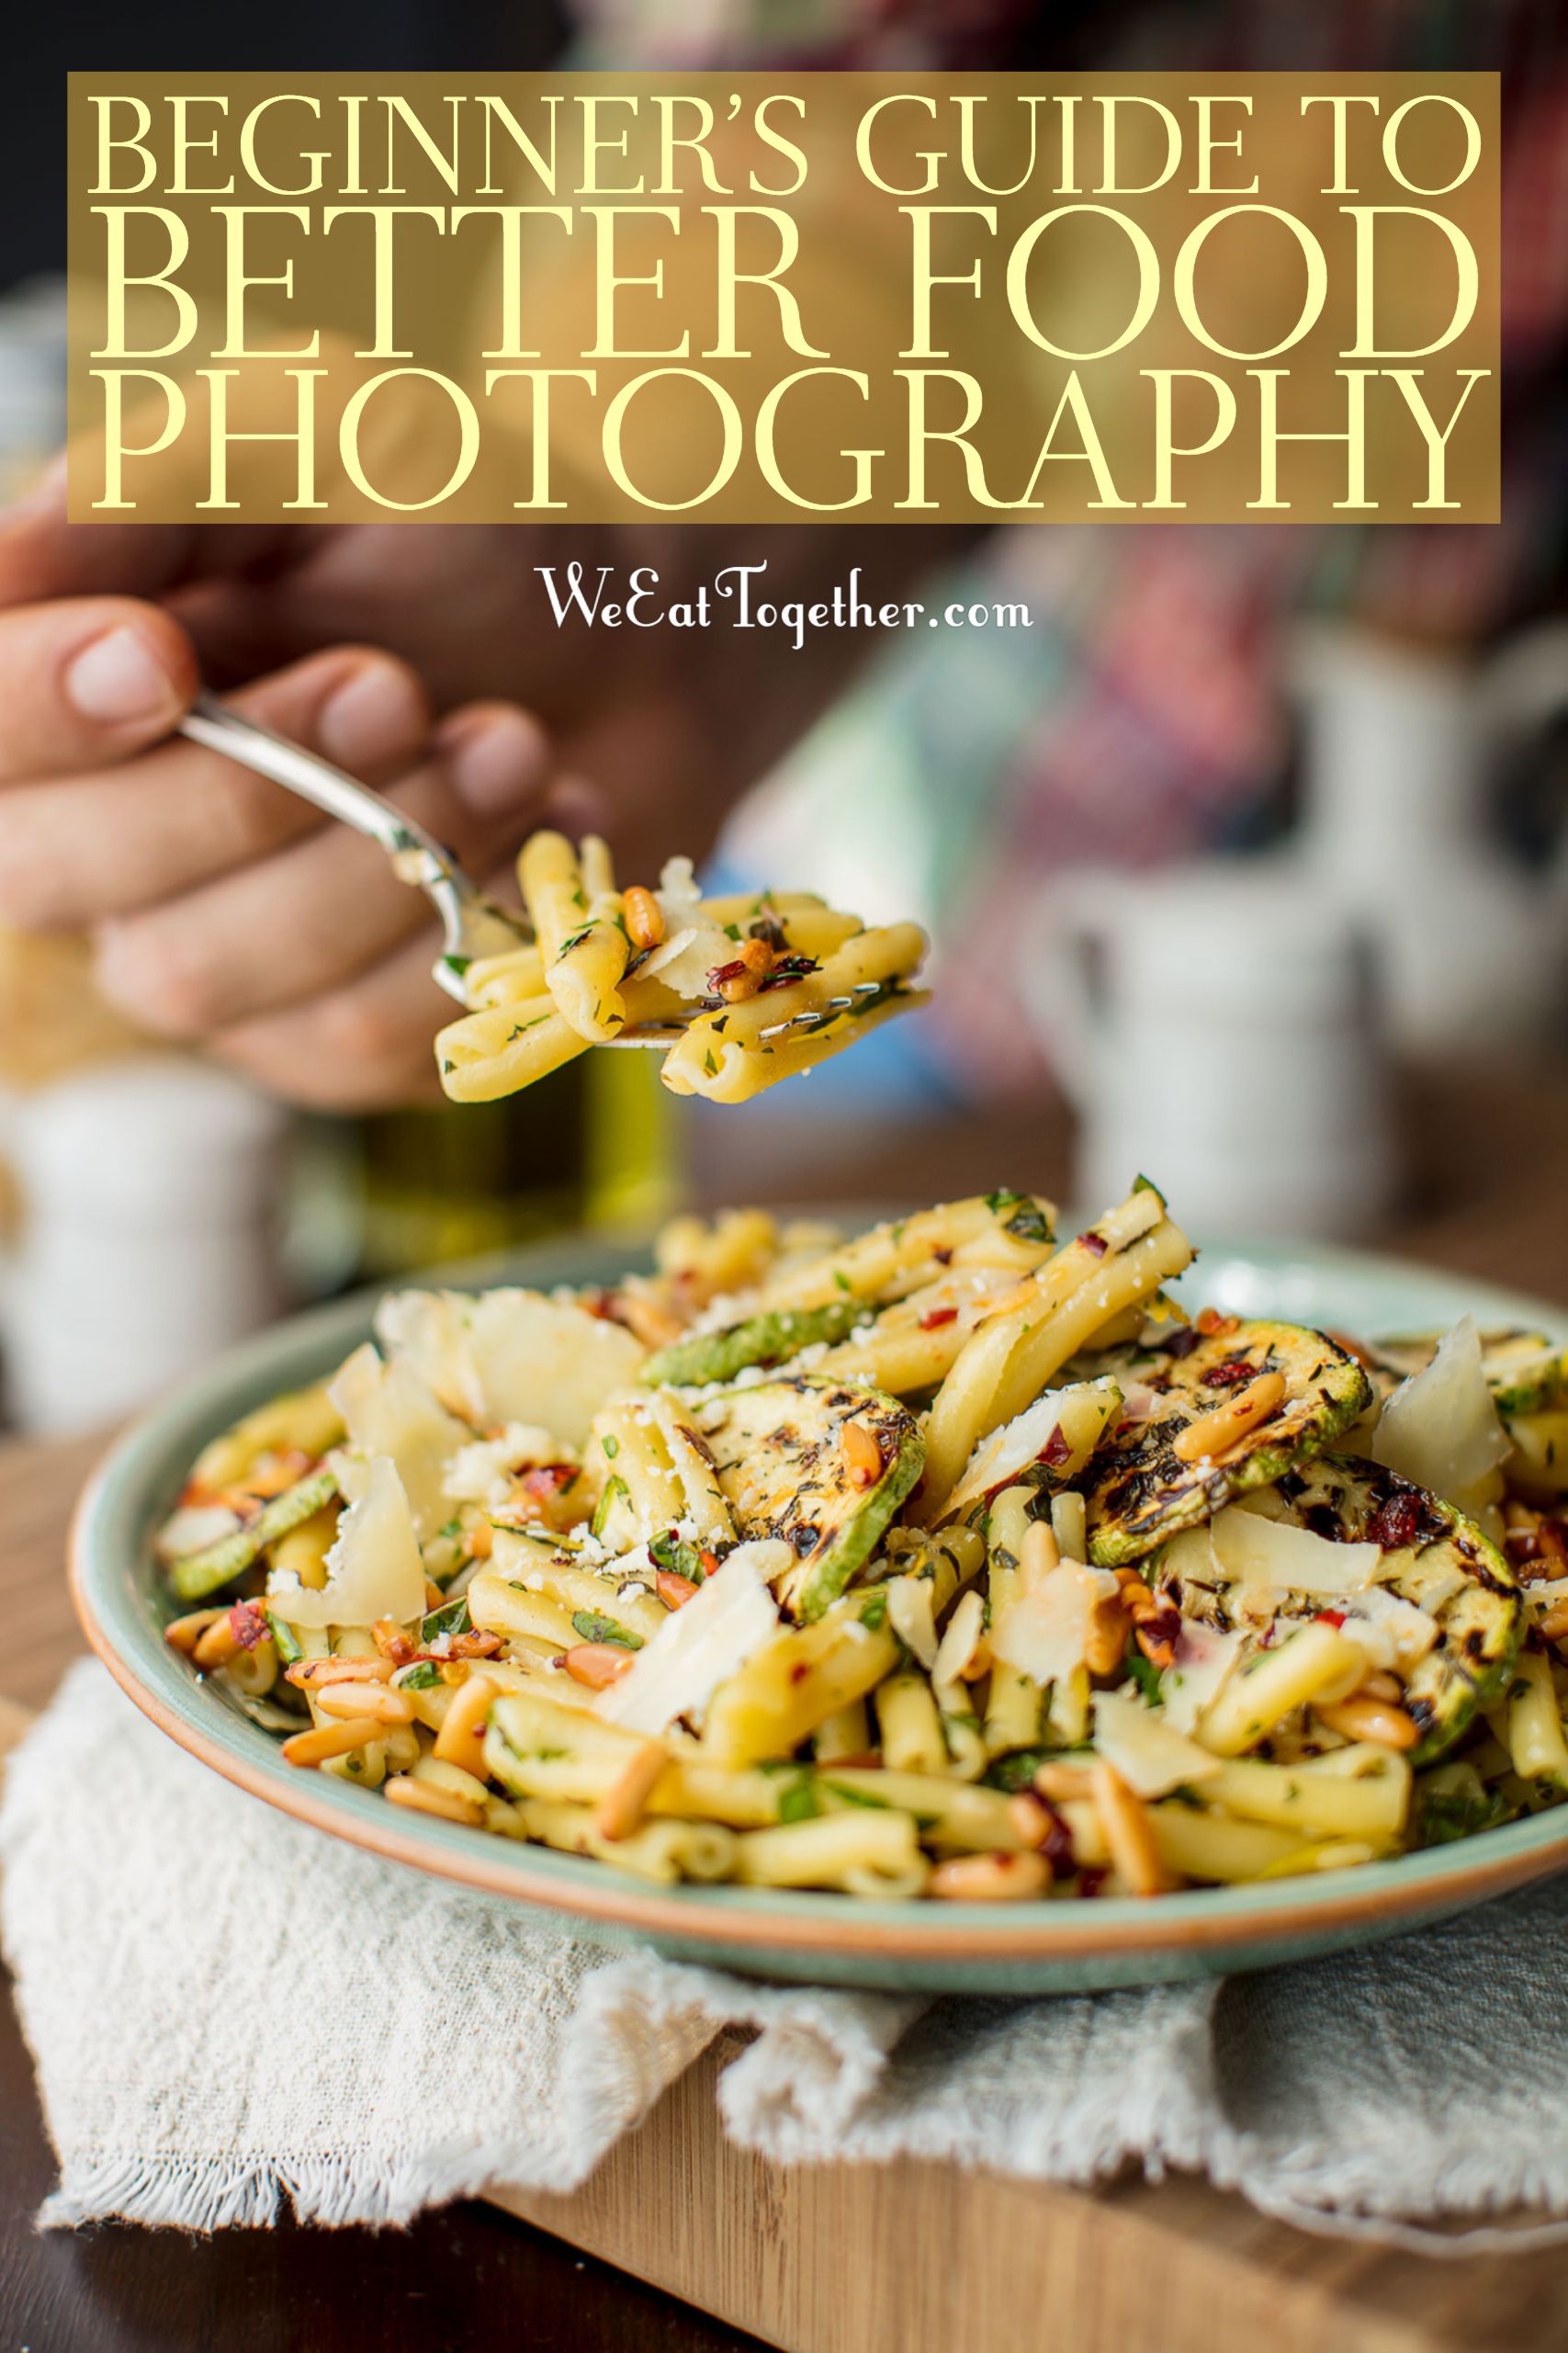 Food Photography Tips A Beginners Guide To Better Food Photography